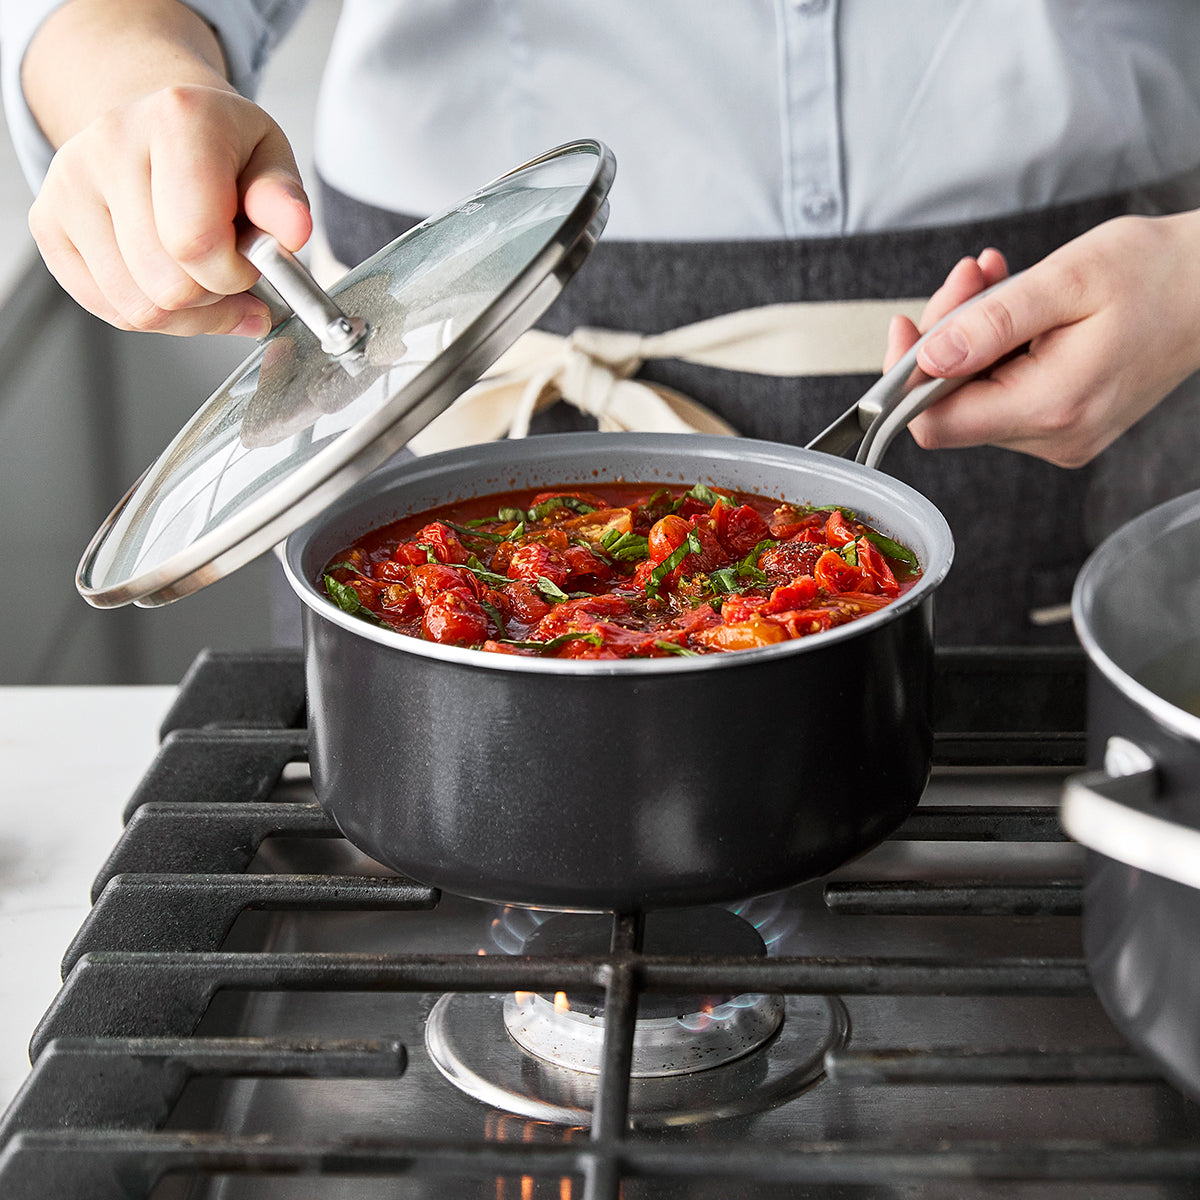 Calphalon's 8-piece cookware set is on sale for $125 off at